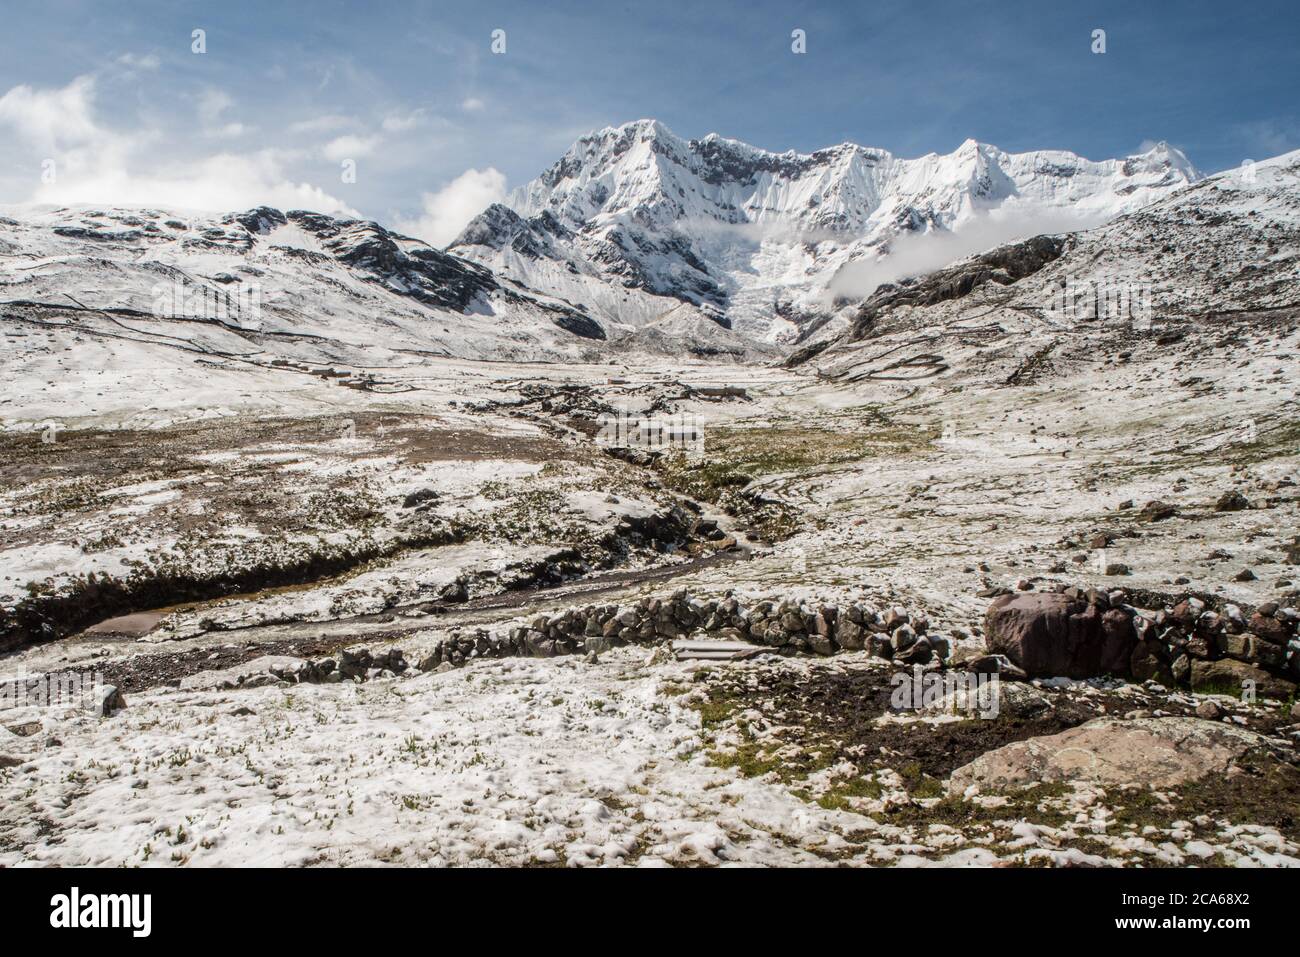 A blizzard swept in and morning arrives with the Andean landscape of the Cordillera Vilcanota covered in snow. Stock Photo